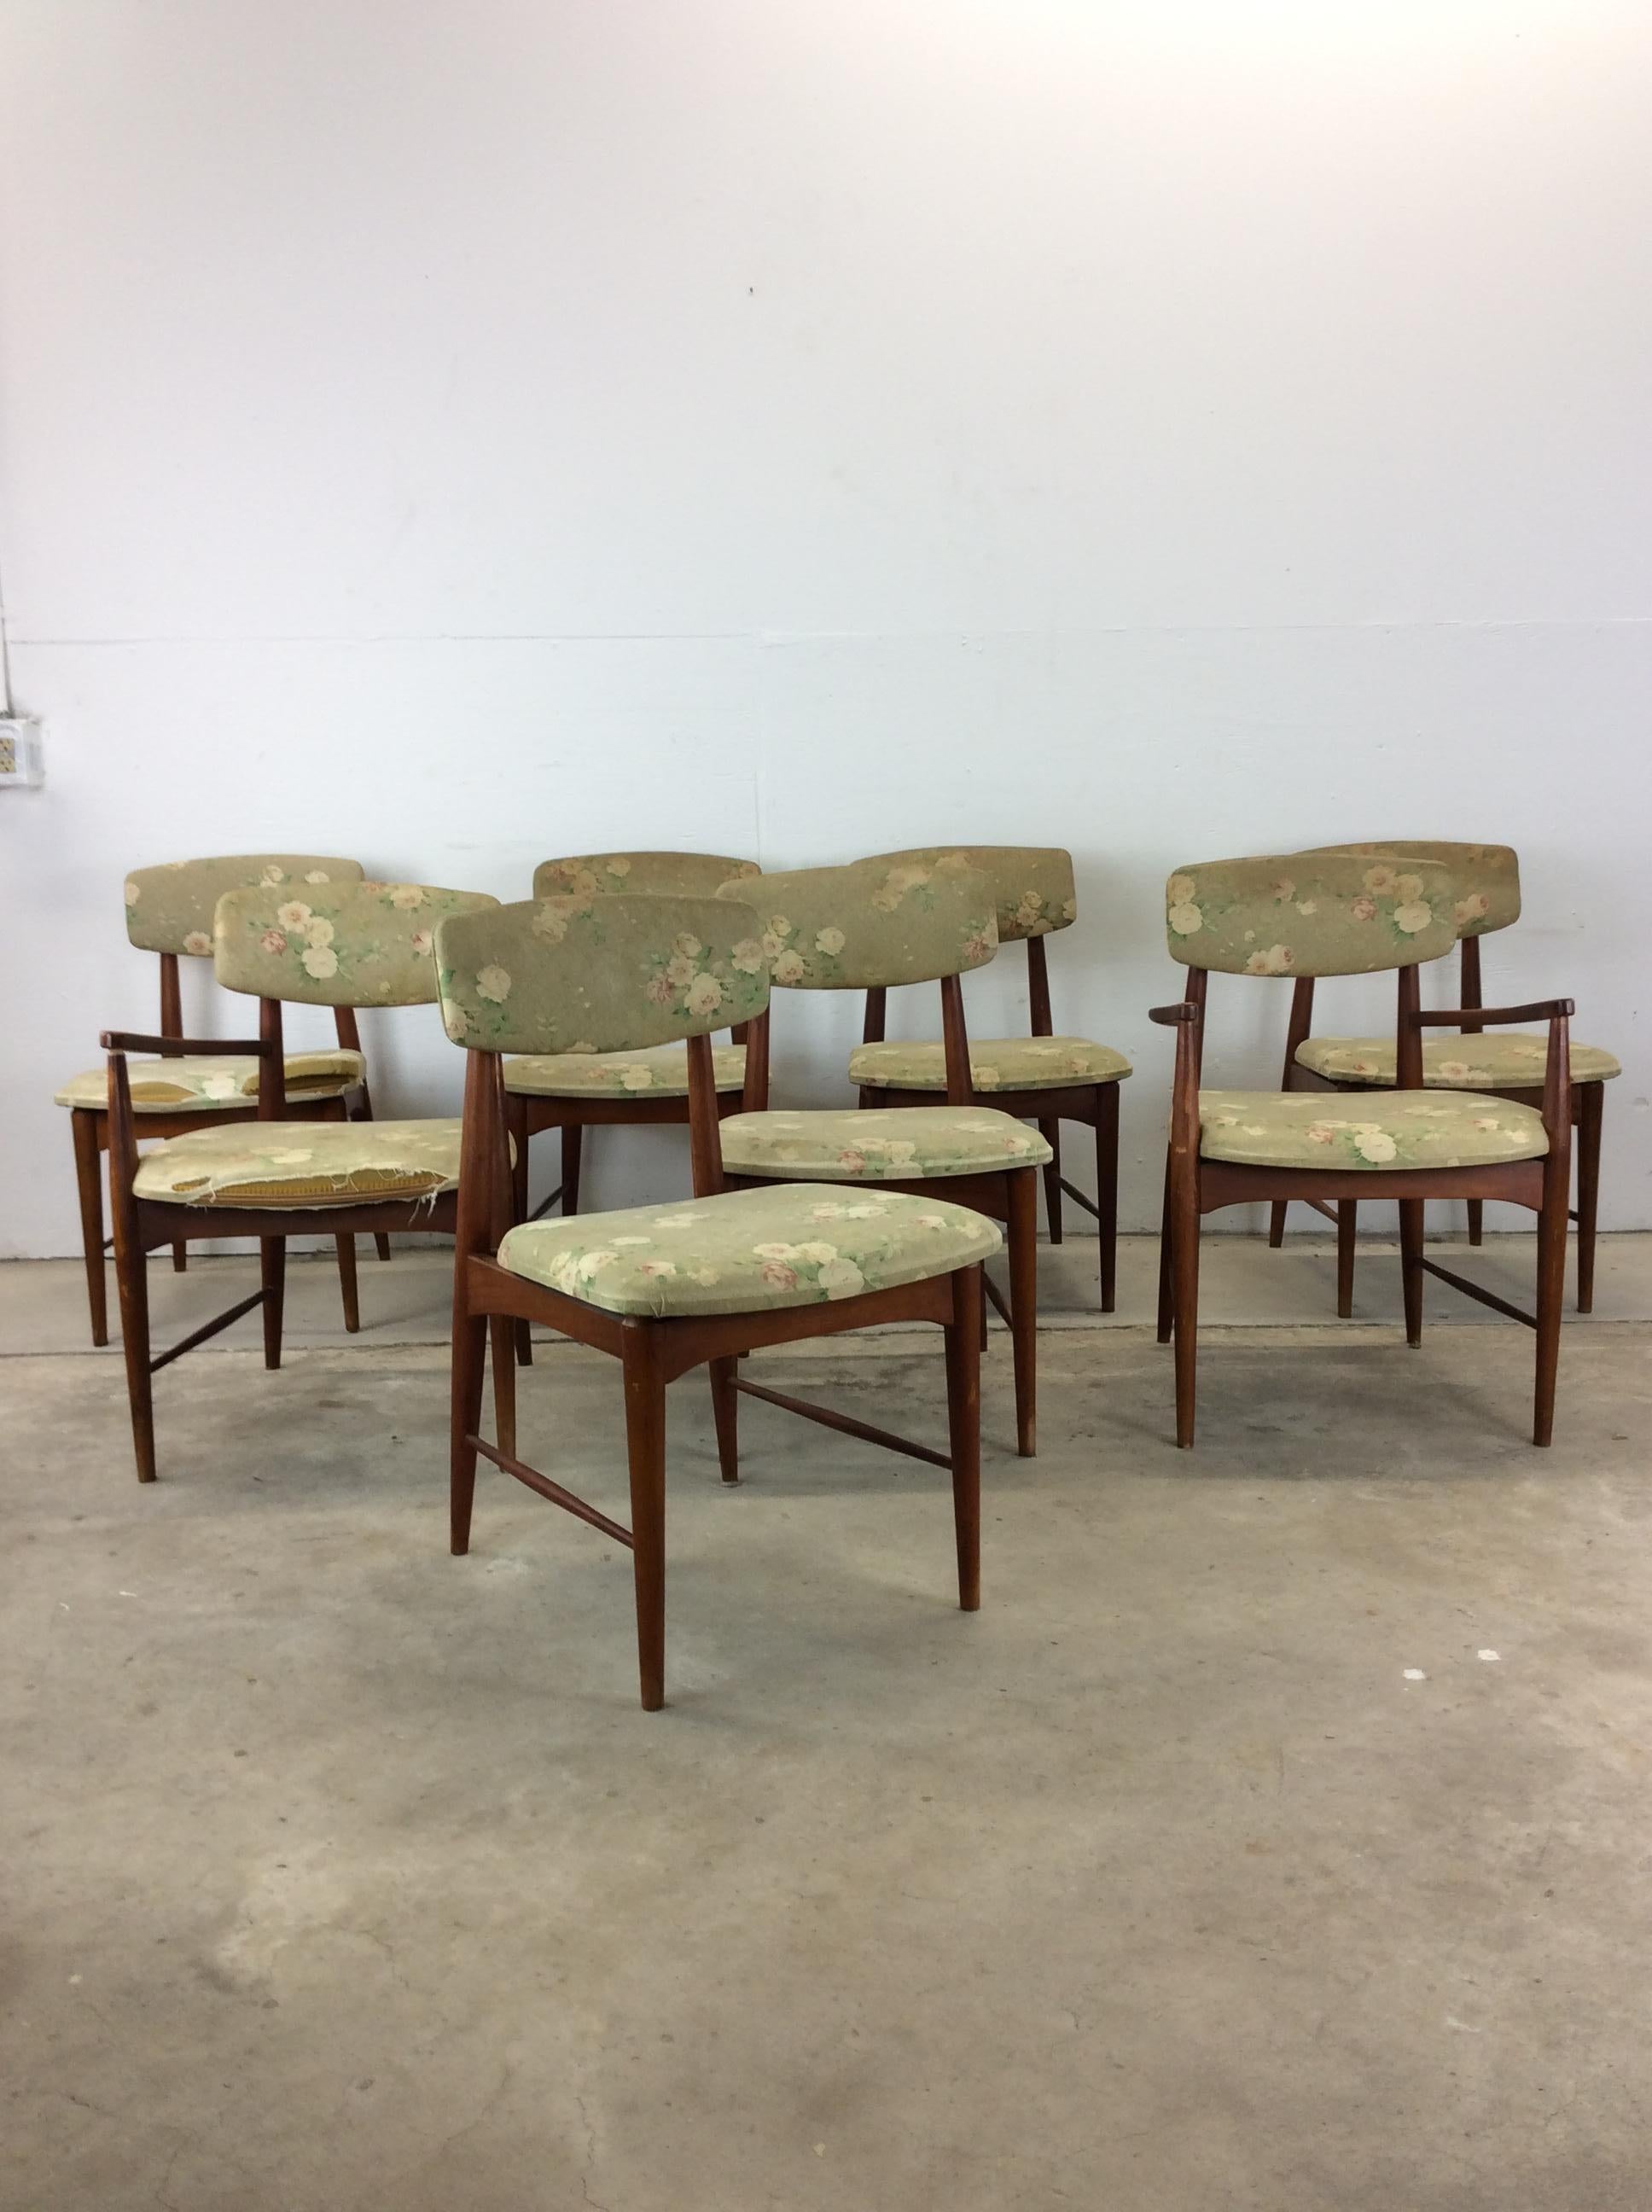 This set of 8 mid century modern dining chairs features hardwood construction, original walnut finish, vintage (but not original) floral upholstery, solid wood armrests and tall tapered legs.  Set of 8 includes 2 arm chairs and six side